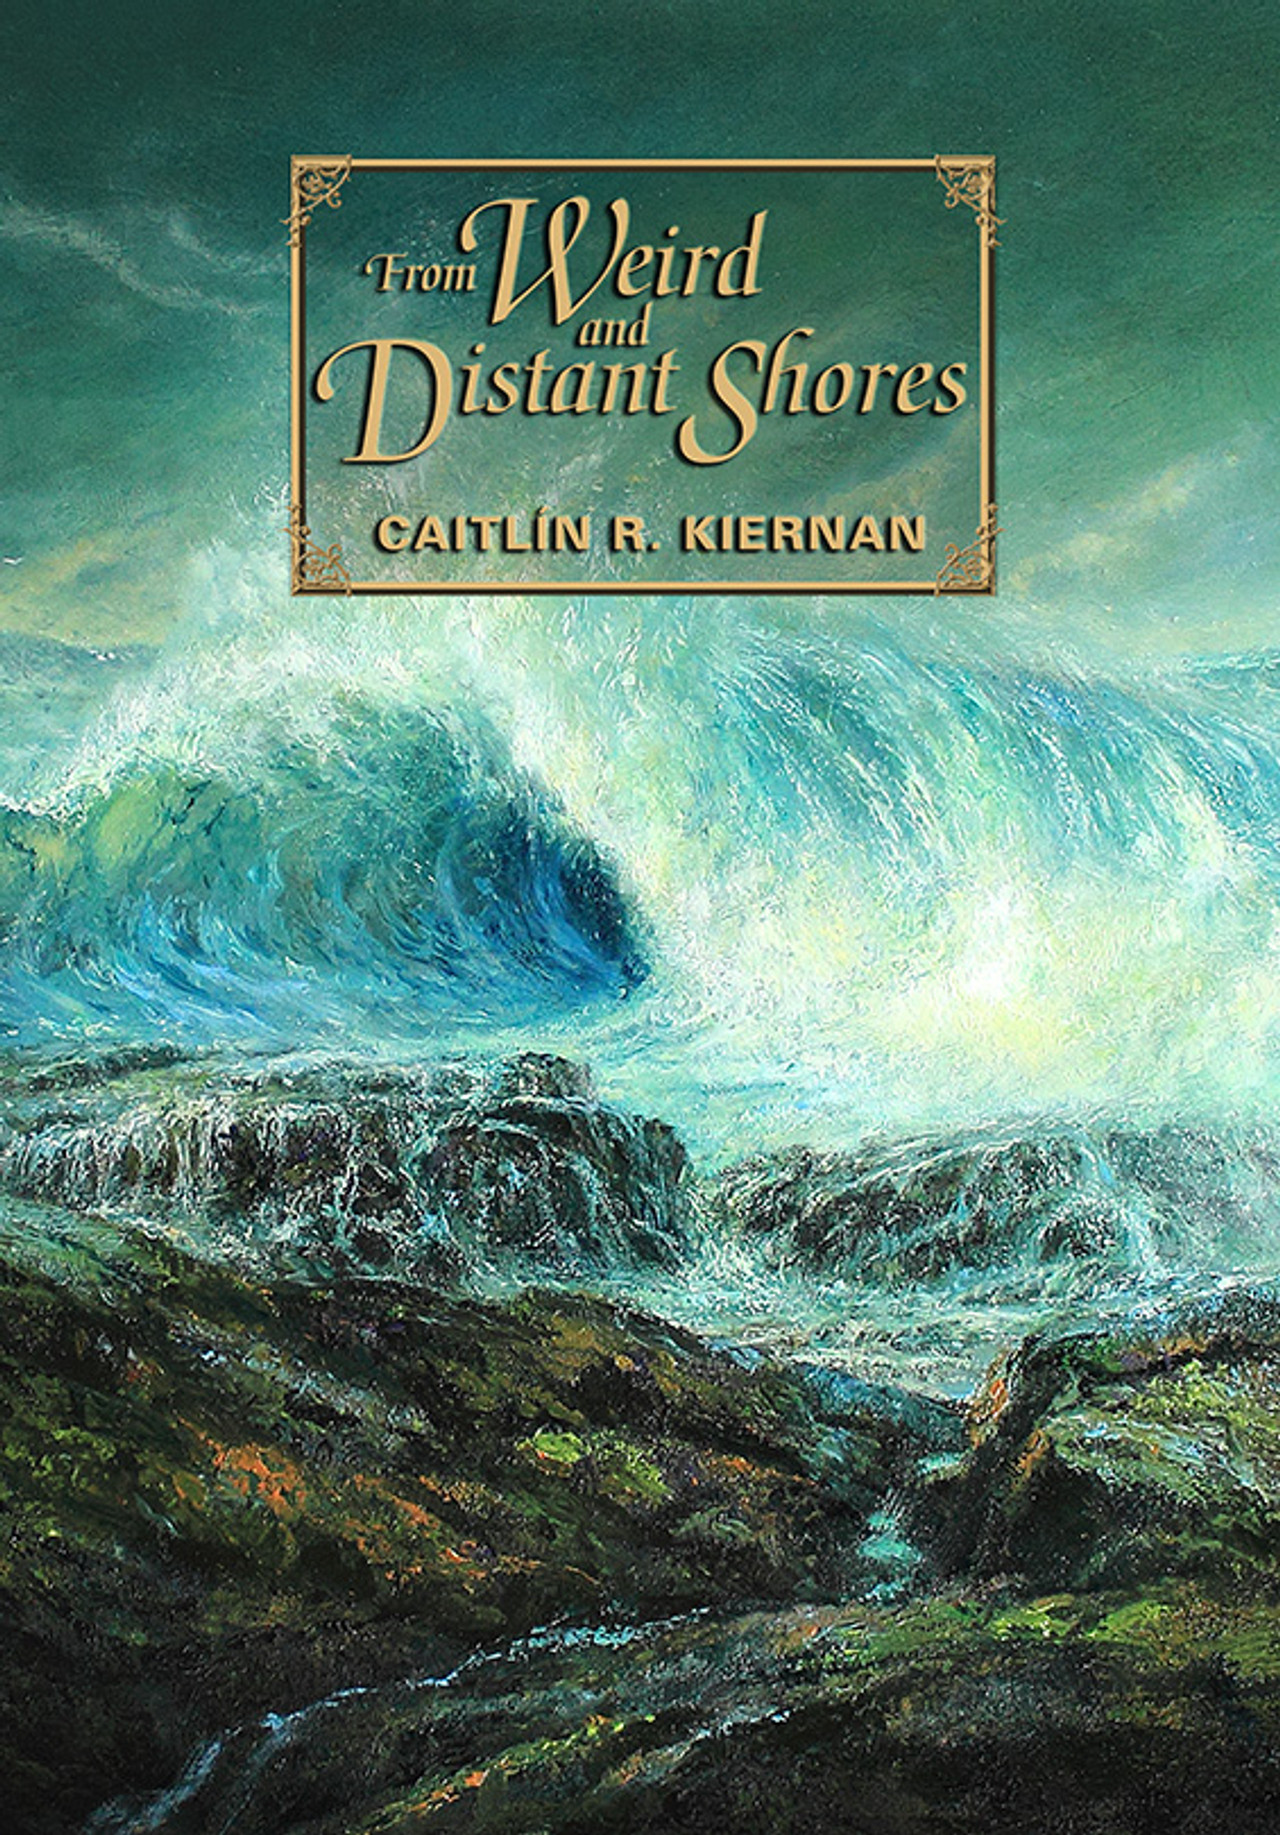 From Weird and Distant Shores by Caitlin R. Kiernan